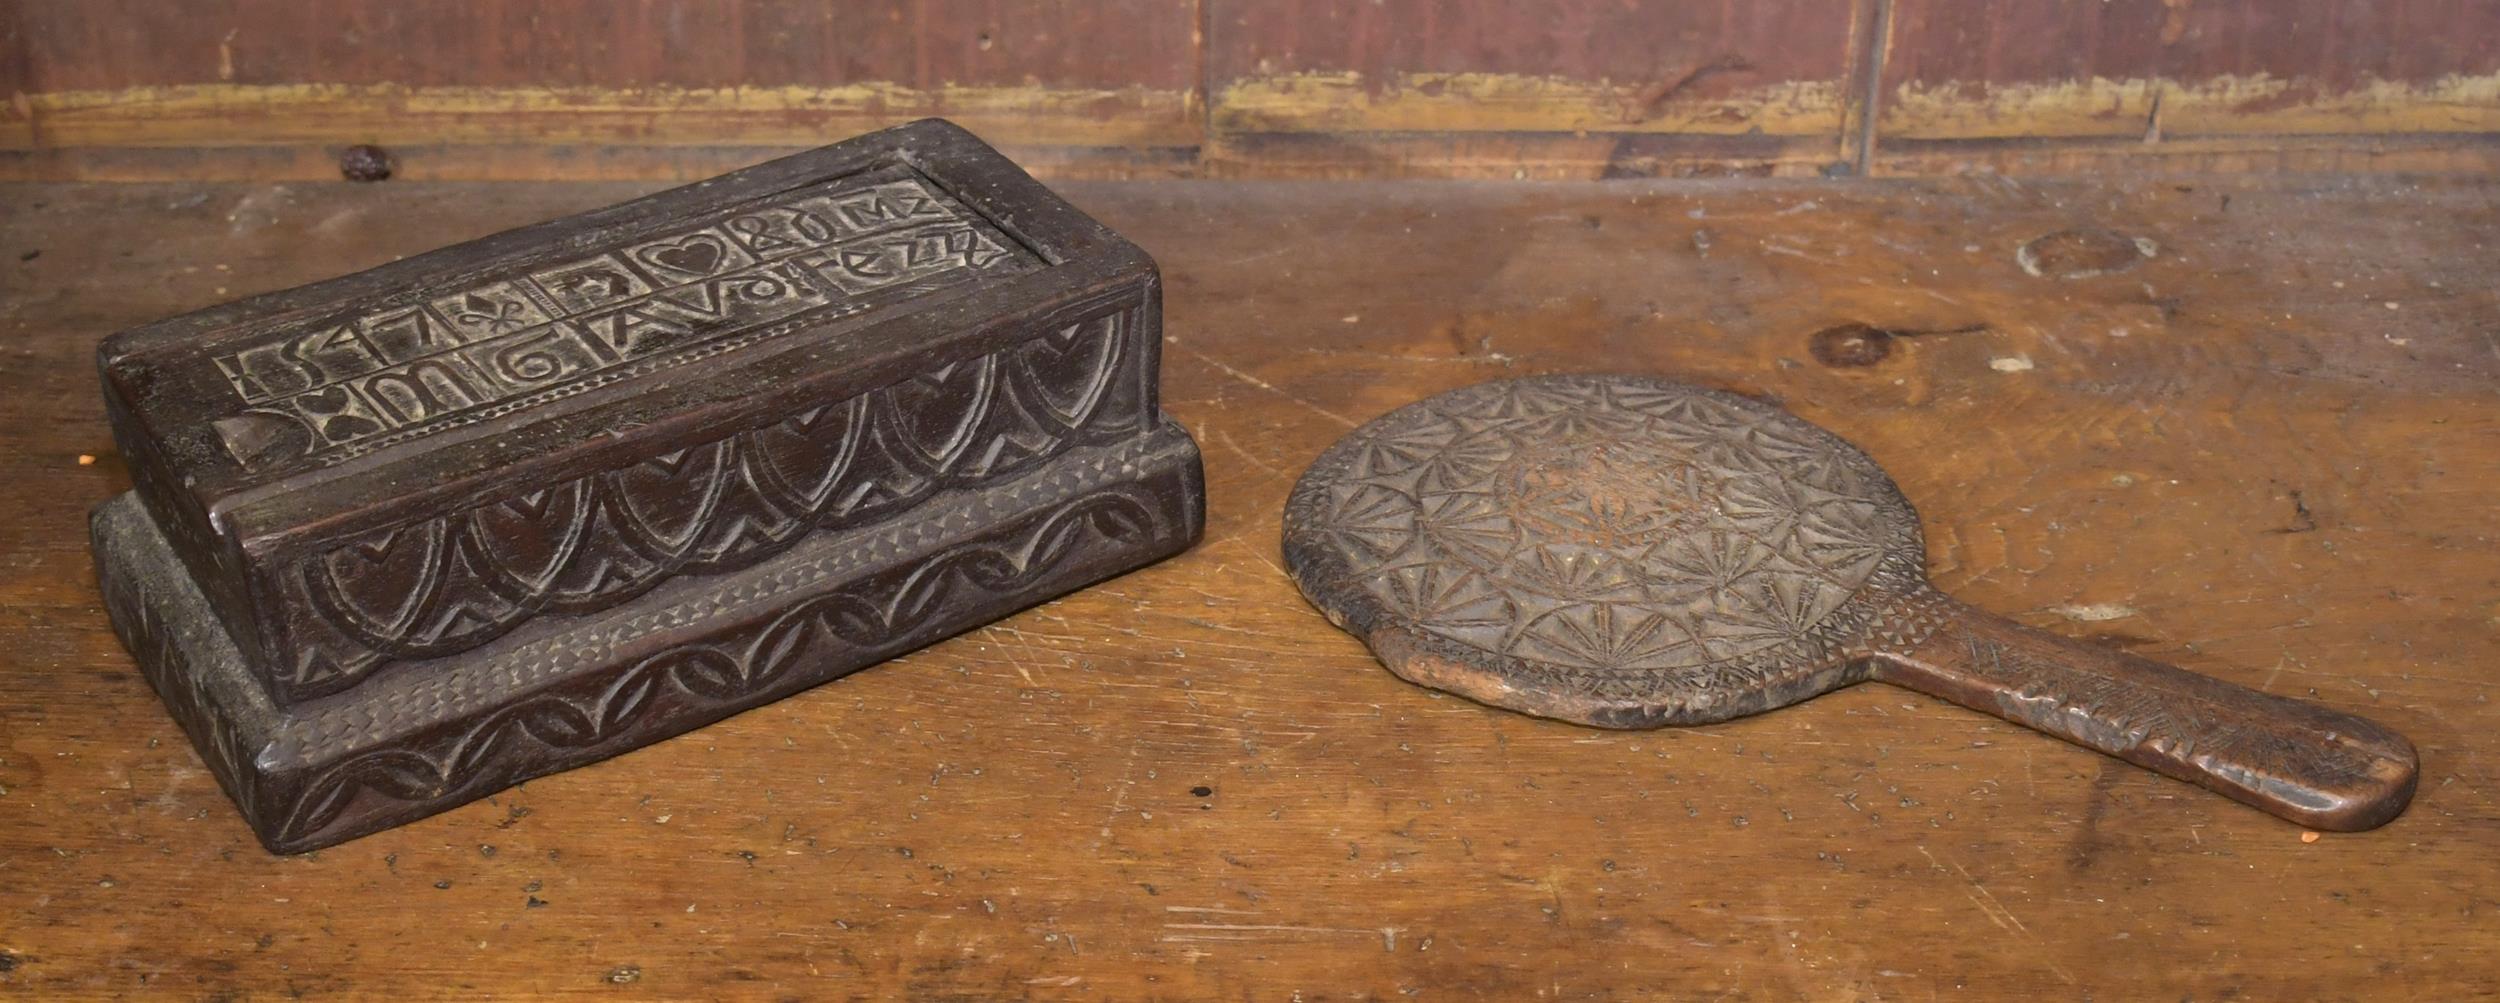 EARLY CARVED SLIDE BOX AND MIRROR  29e24a